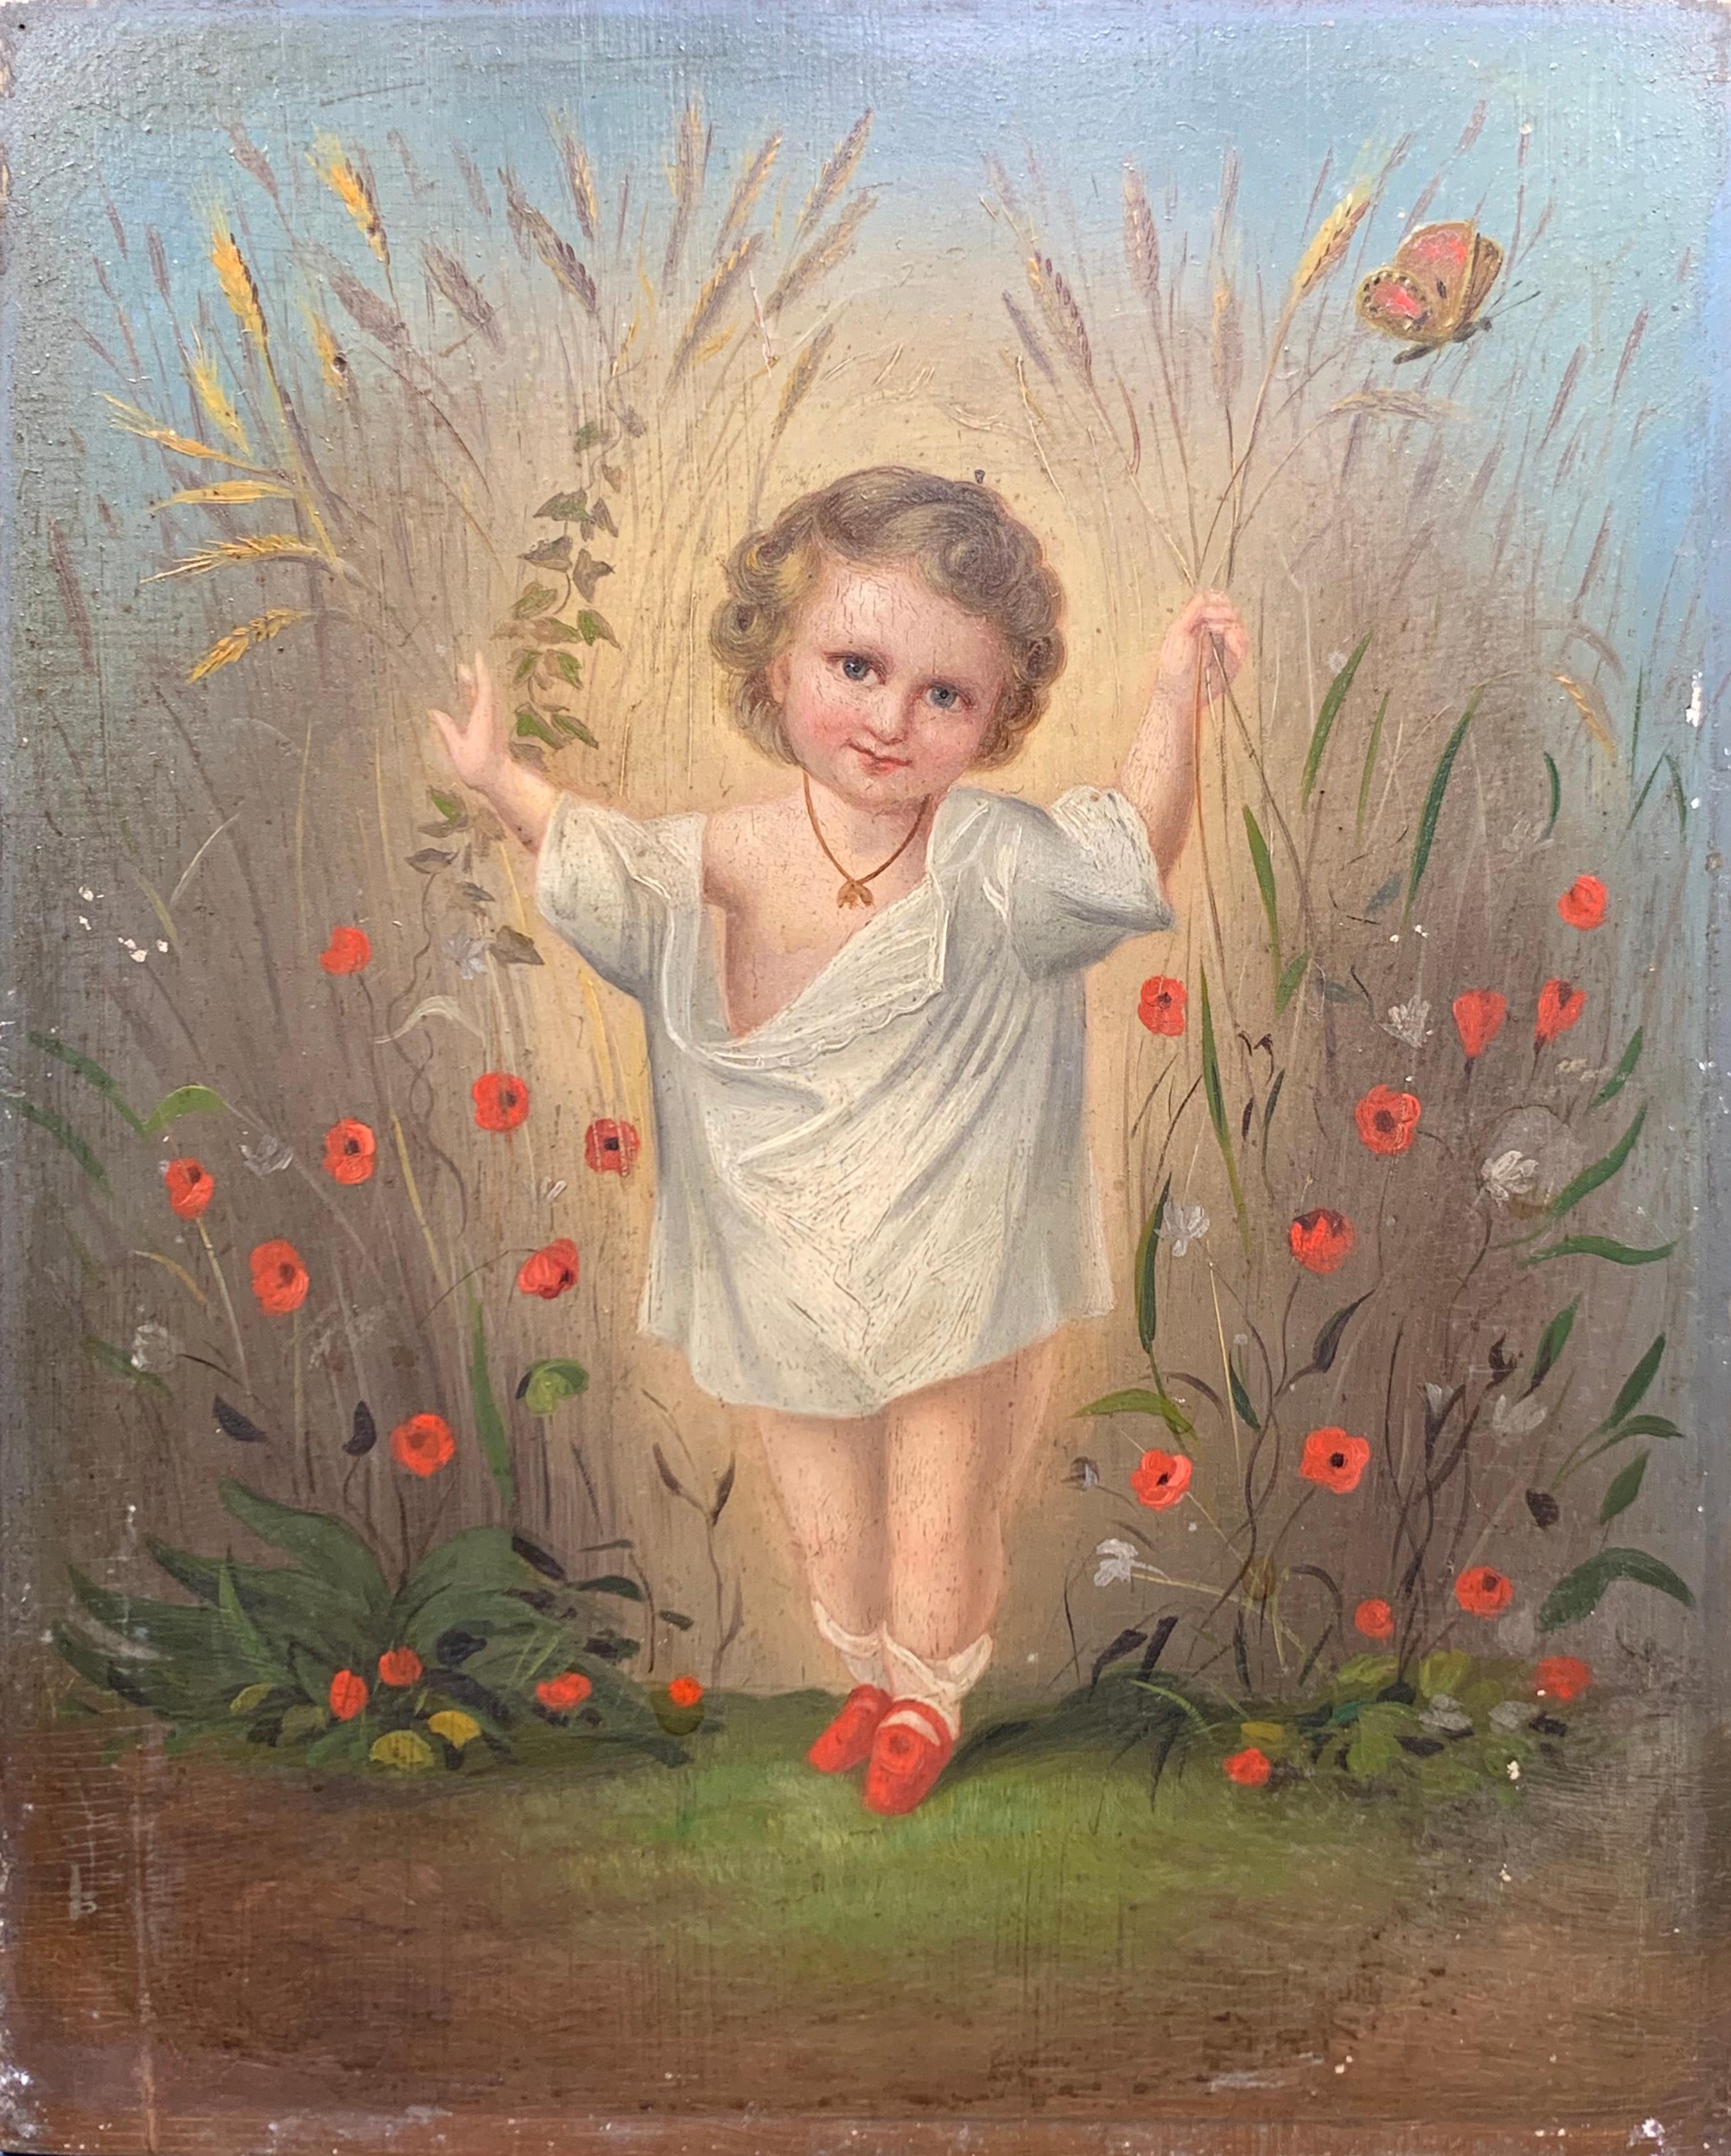 Unknown Figurative Painting - Allegory of The Wheat Harvest (19th-century Folk Art Child portrait) 